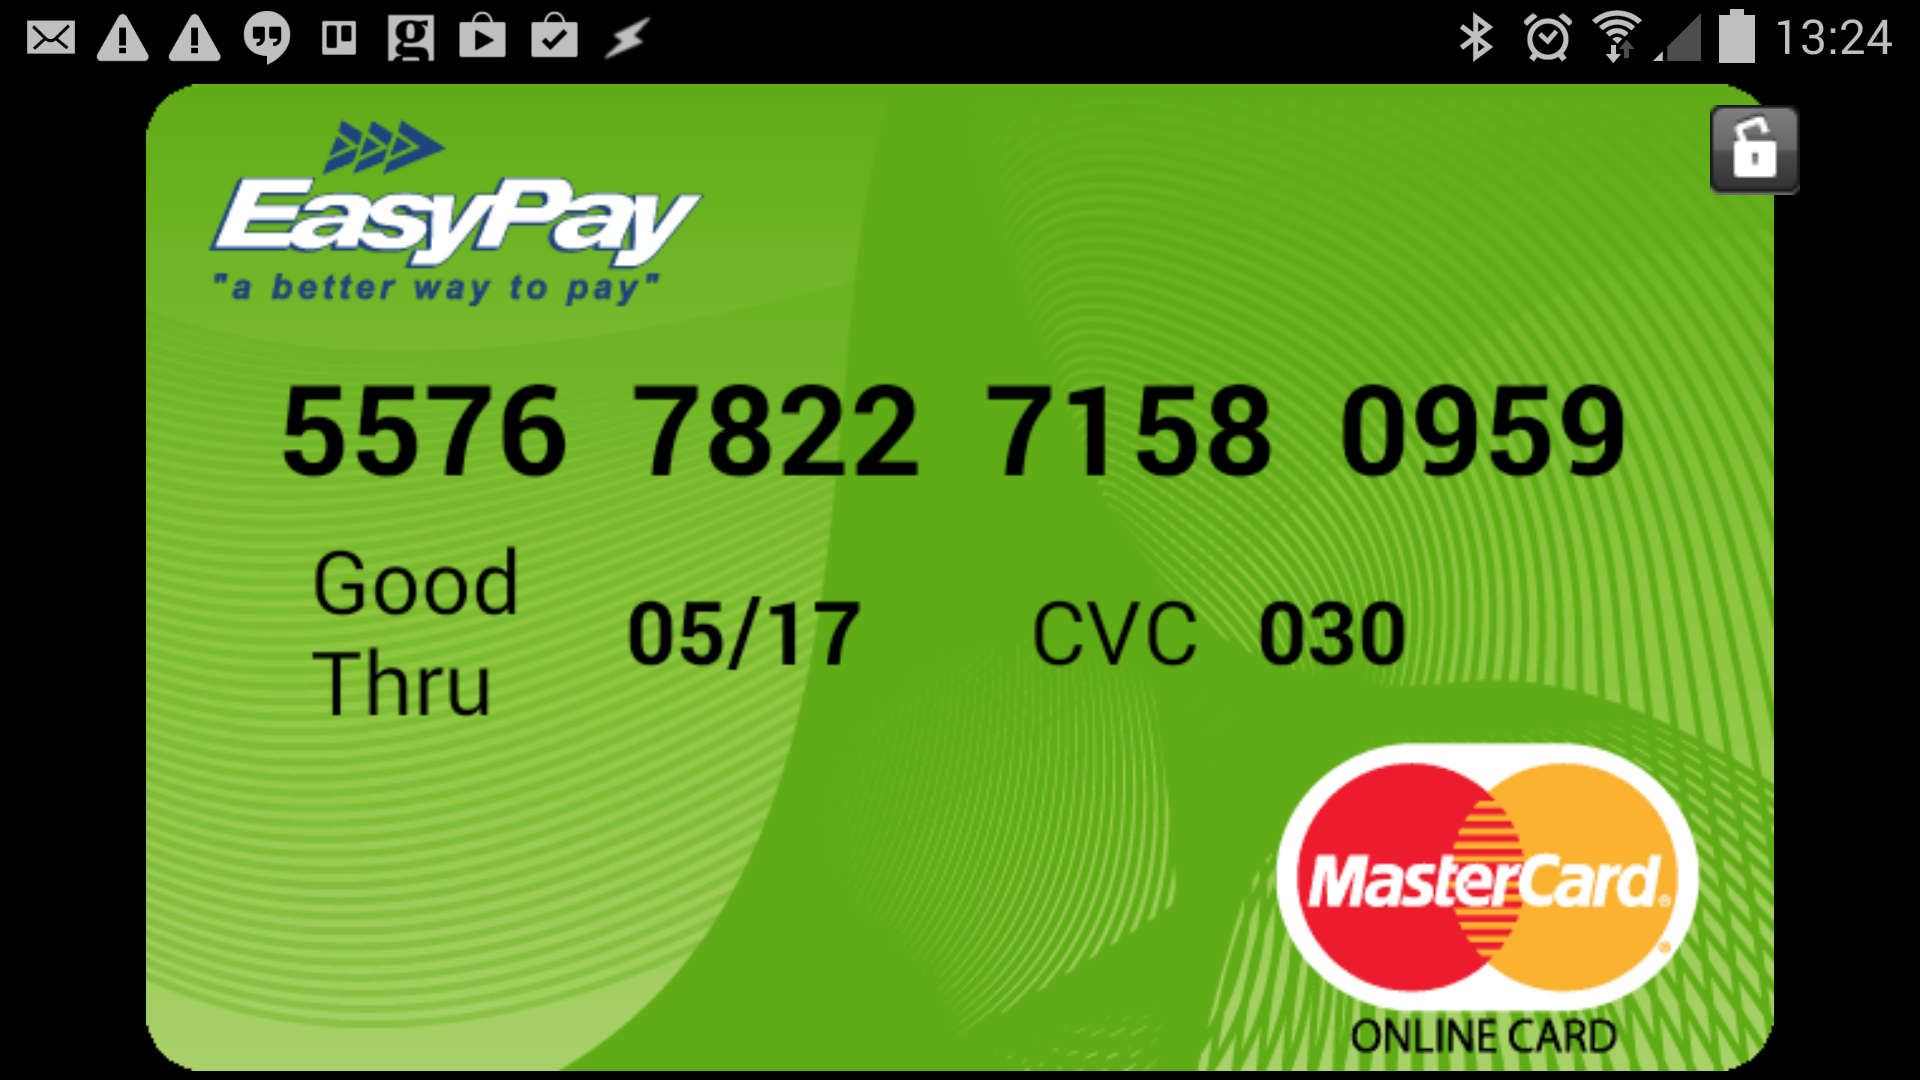 Single use SA credit card app makes payments private